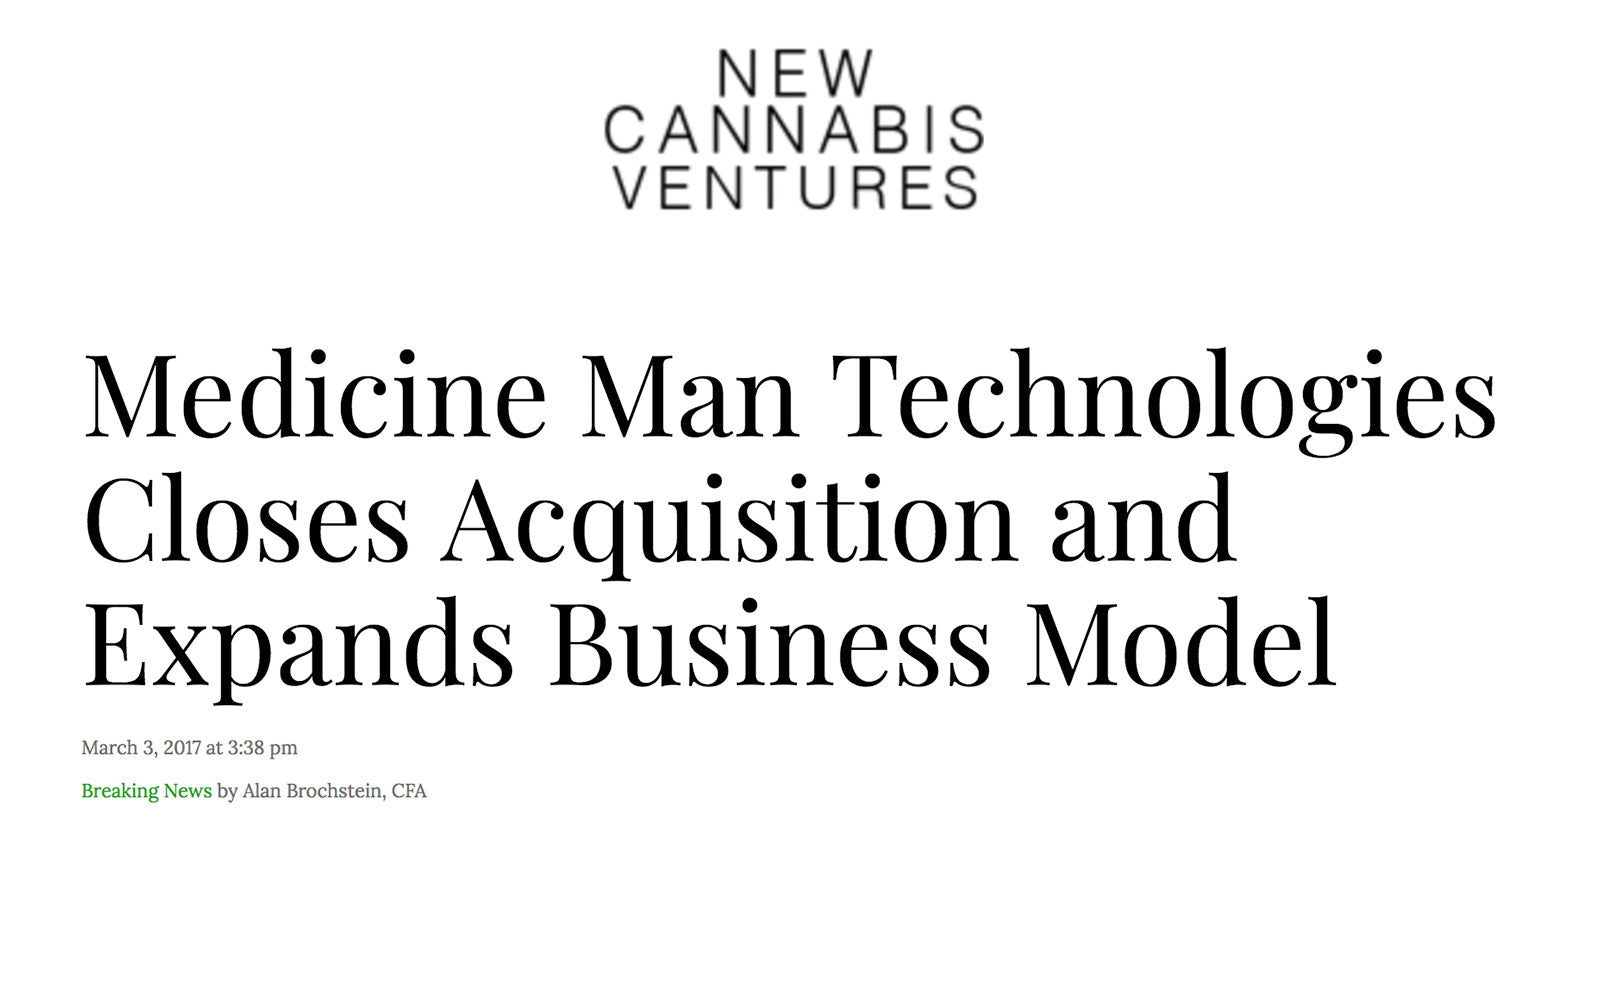 New Cannabis Ventures - Medicine Man Technologies Closes Acquisition and Expands Business Model